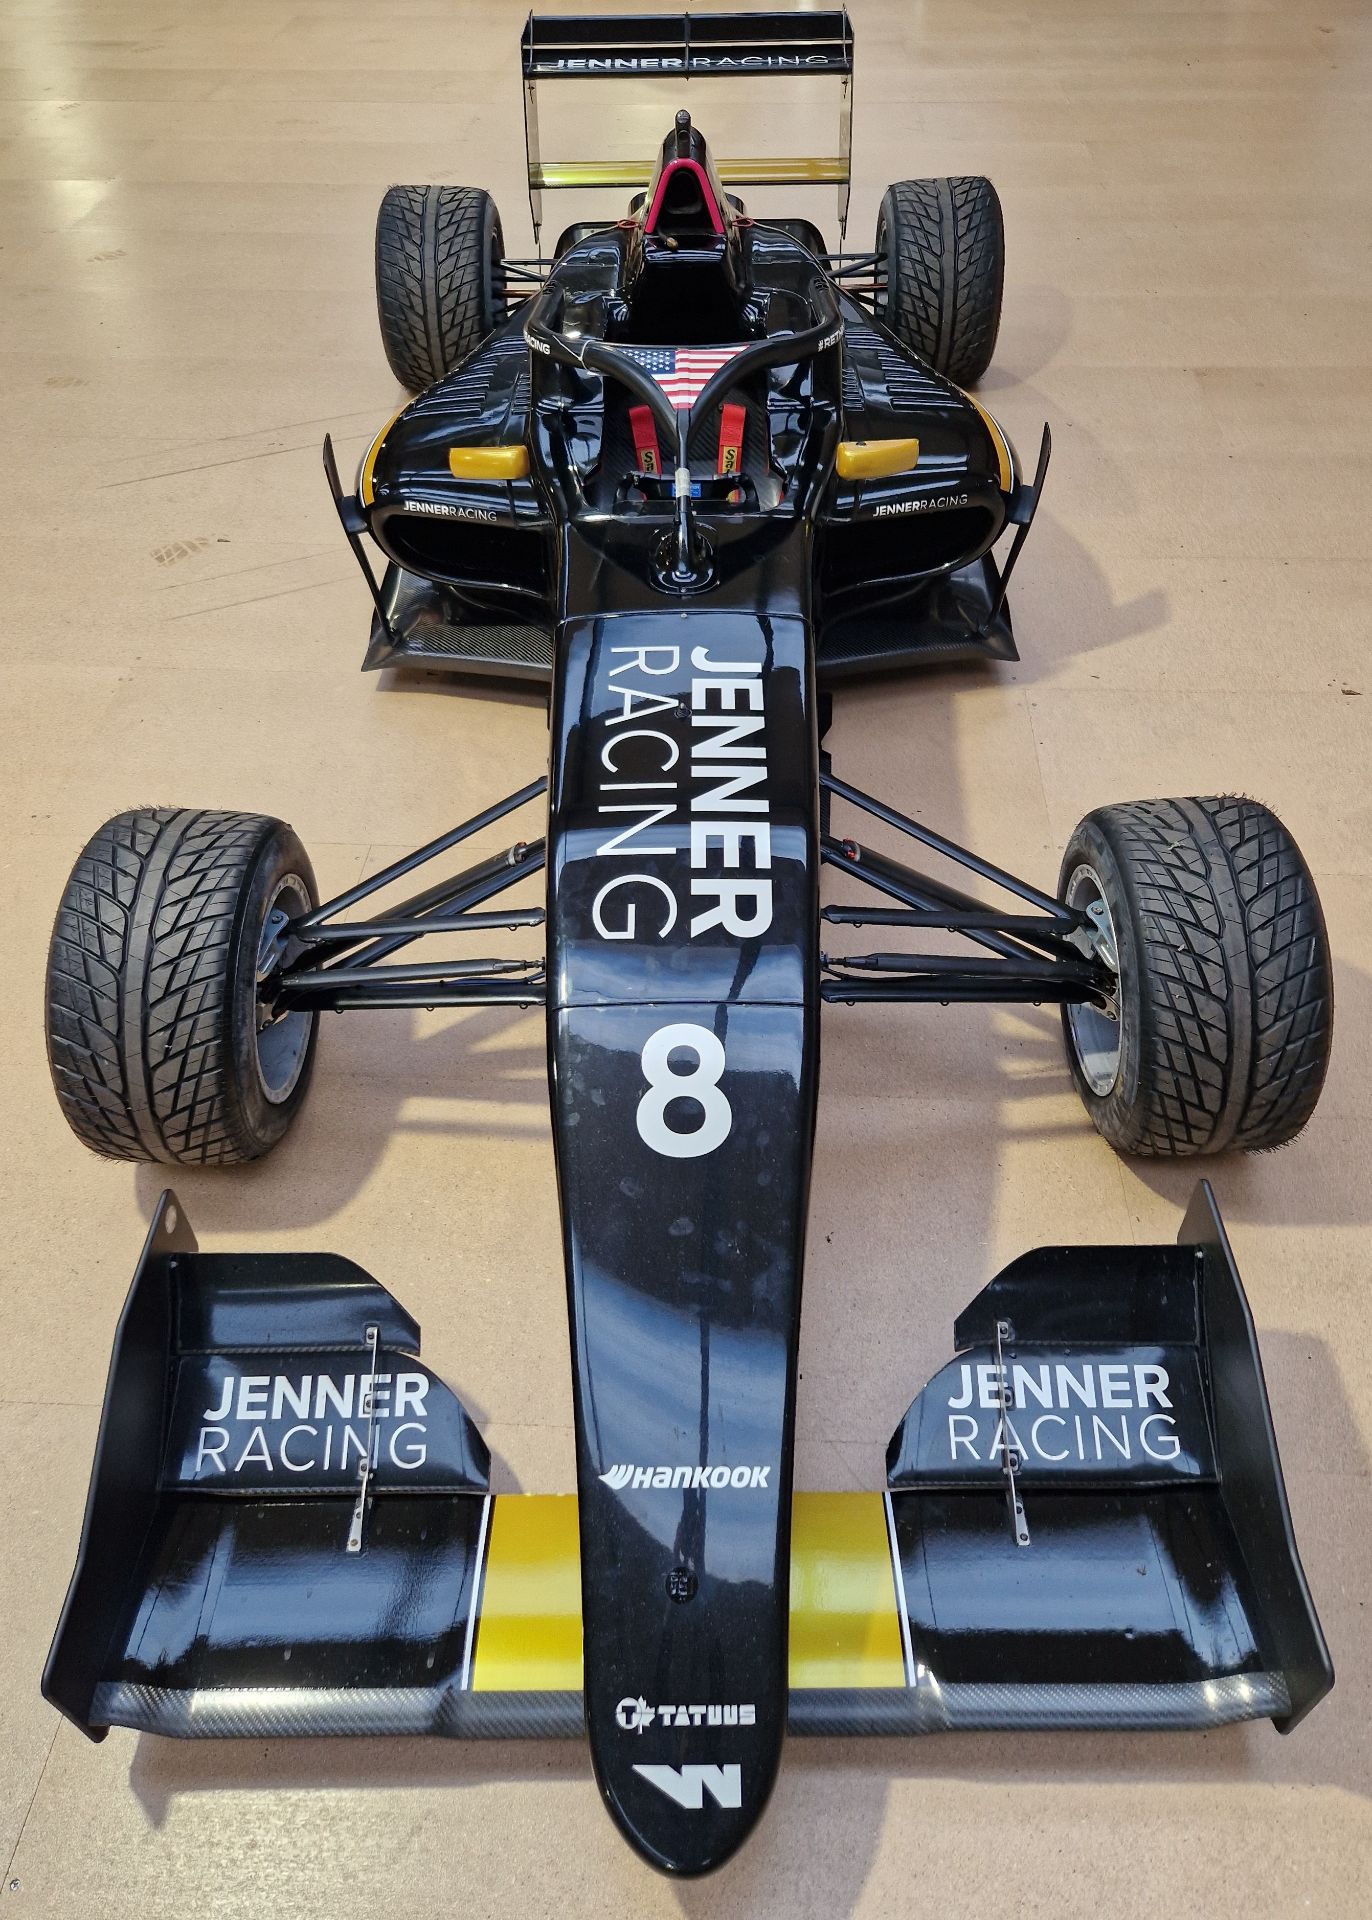 One TATUUS F3 T-318 Alfa Romeo Race Car Chassis No. 039 (2019) Finished in JENNER RACING Livery as - Image 3 of 7